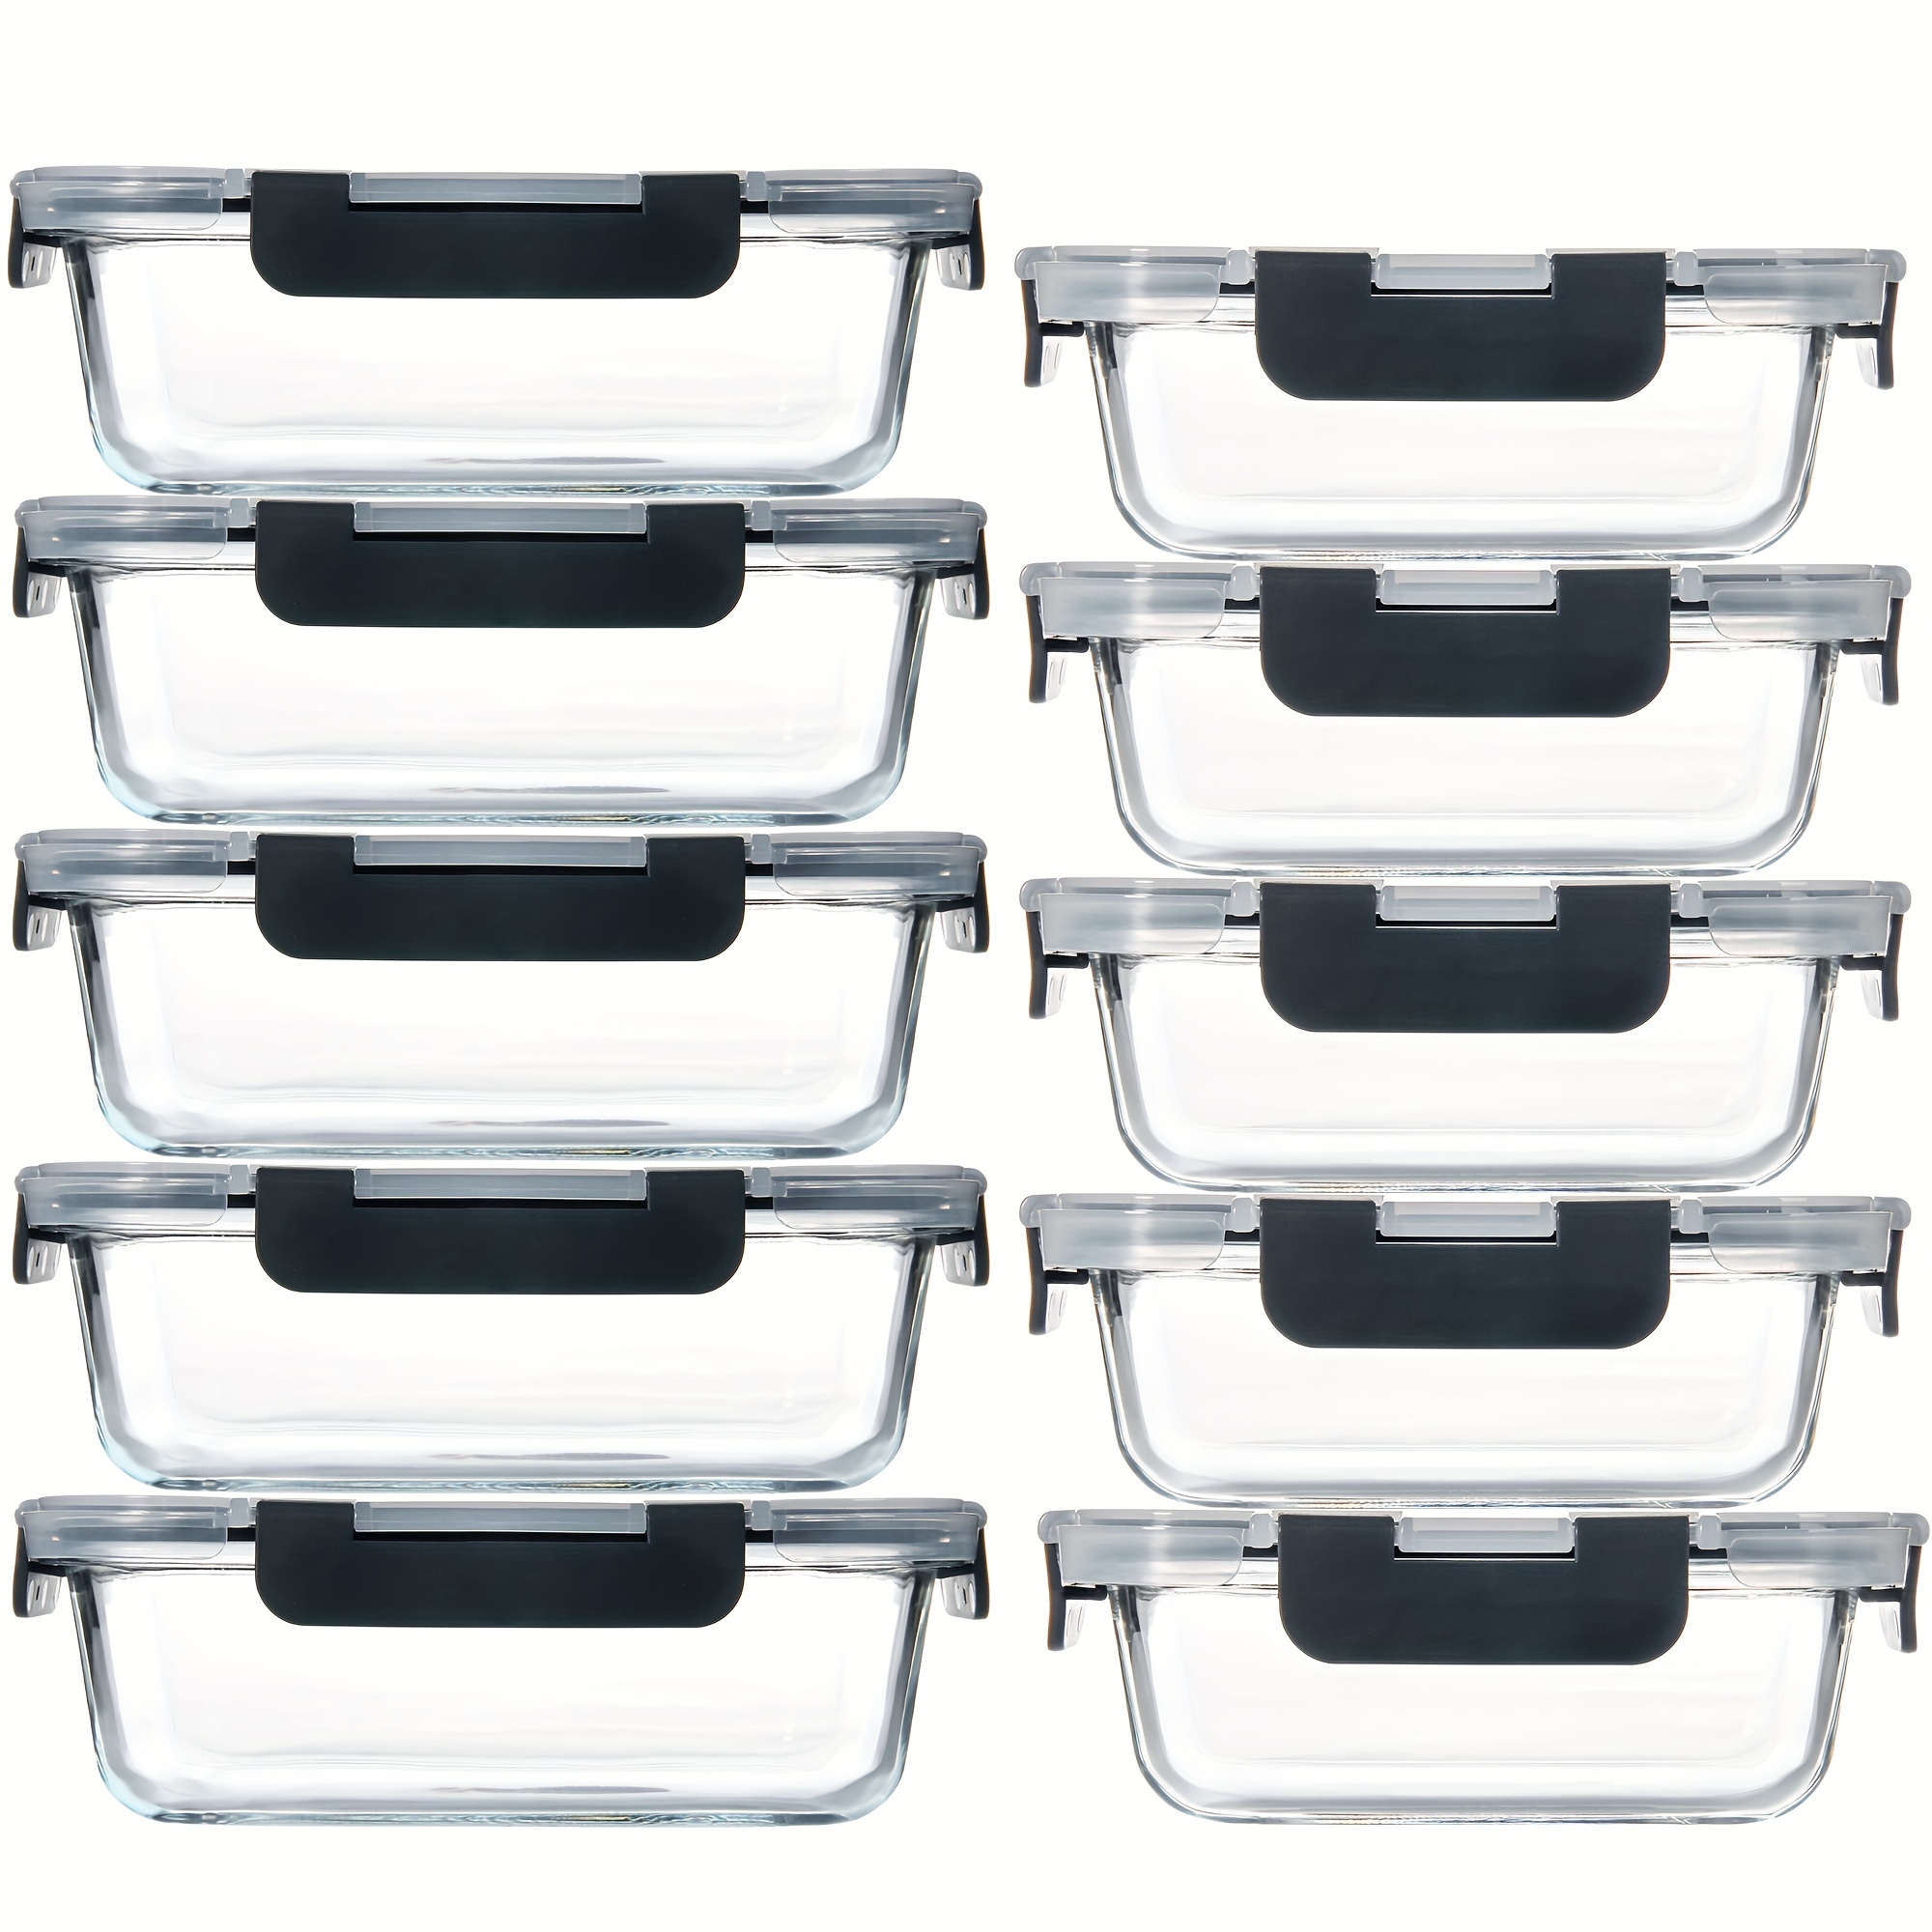 

[10-pack] High Borosilicate Glass Meal Prep Containers Set, Food Storage Containers With Airtight Lids, For Home Kitchen Office Lunch Portion Control - Grey